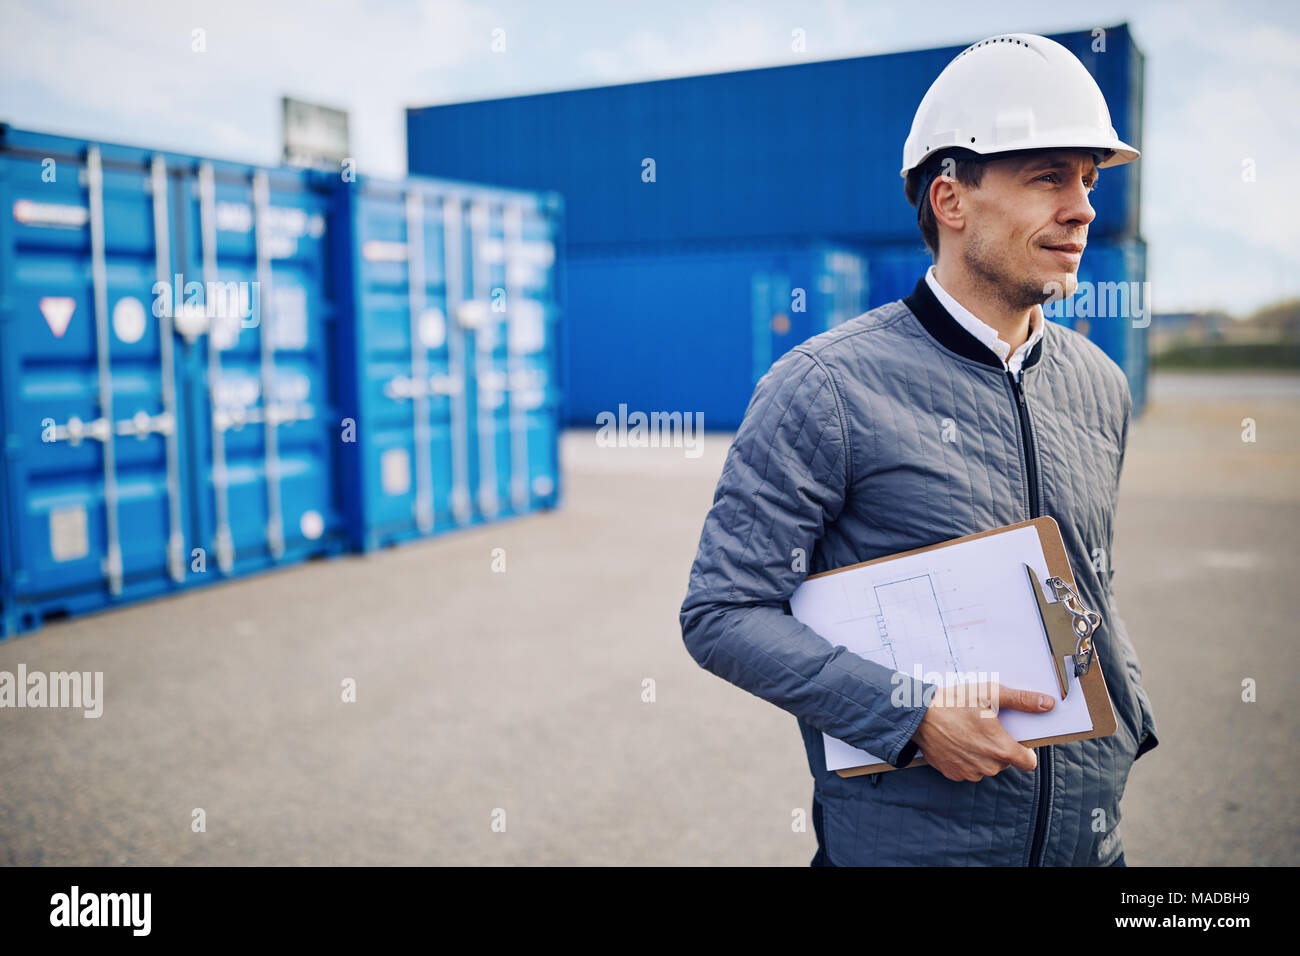 Port manager wearing a hardhat standing alone on a large commercial shipping dock holding a clipboard Stock Photo